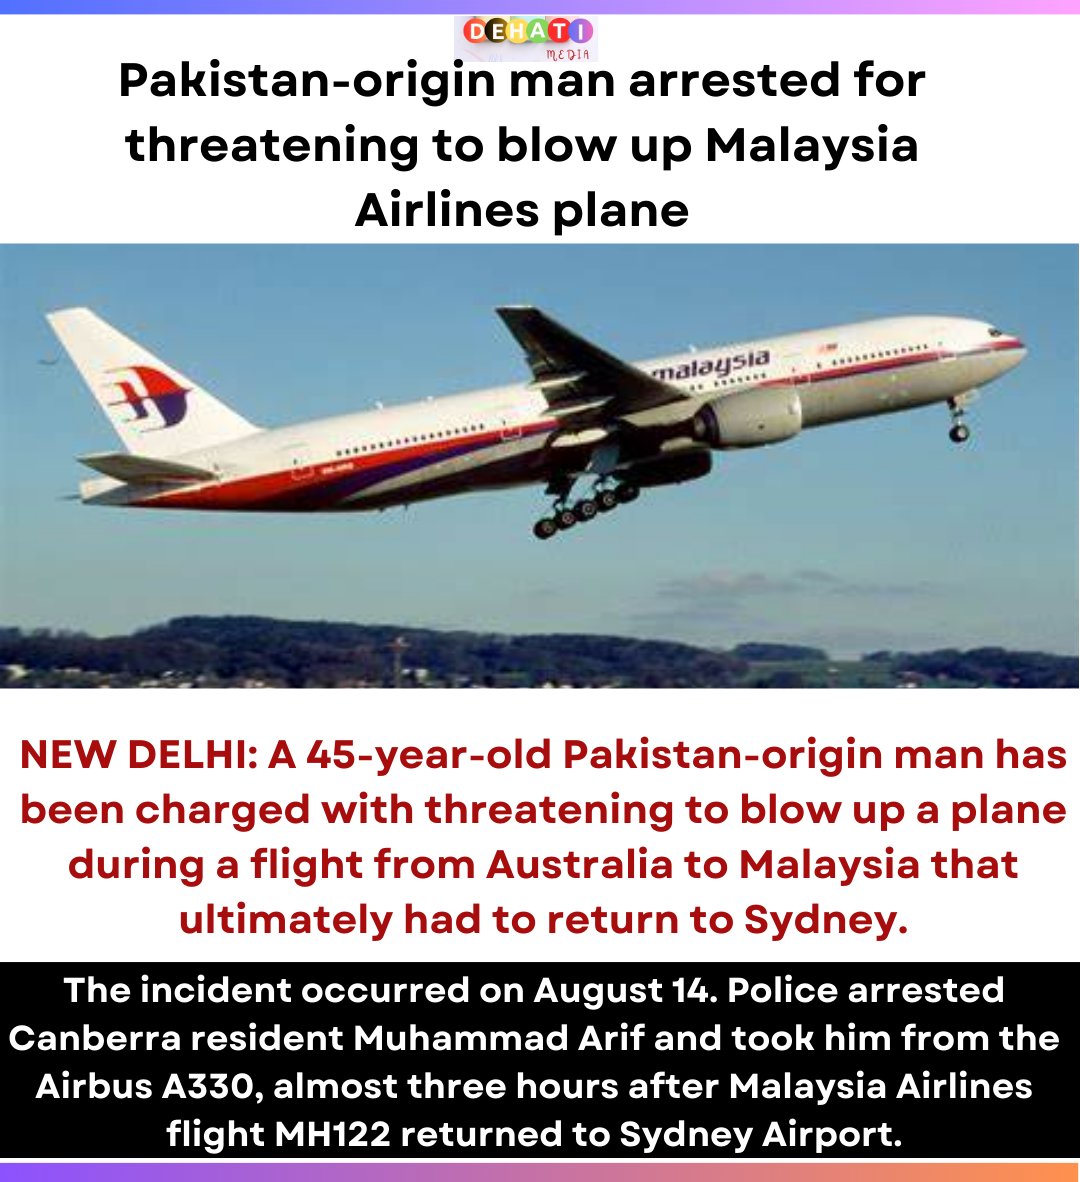 Pakistan-origin man arrested for threatening to blow up Malaysia Airlines plane,
#Pakistan  #Pakistanis  #pakistanimen #malaysiaairlines